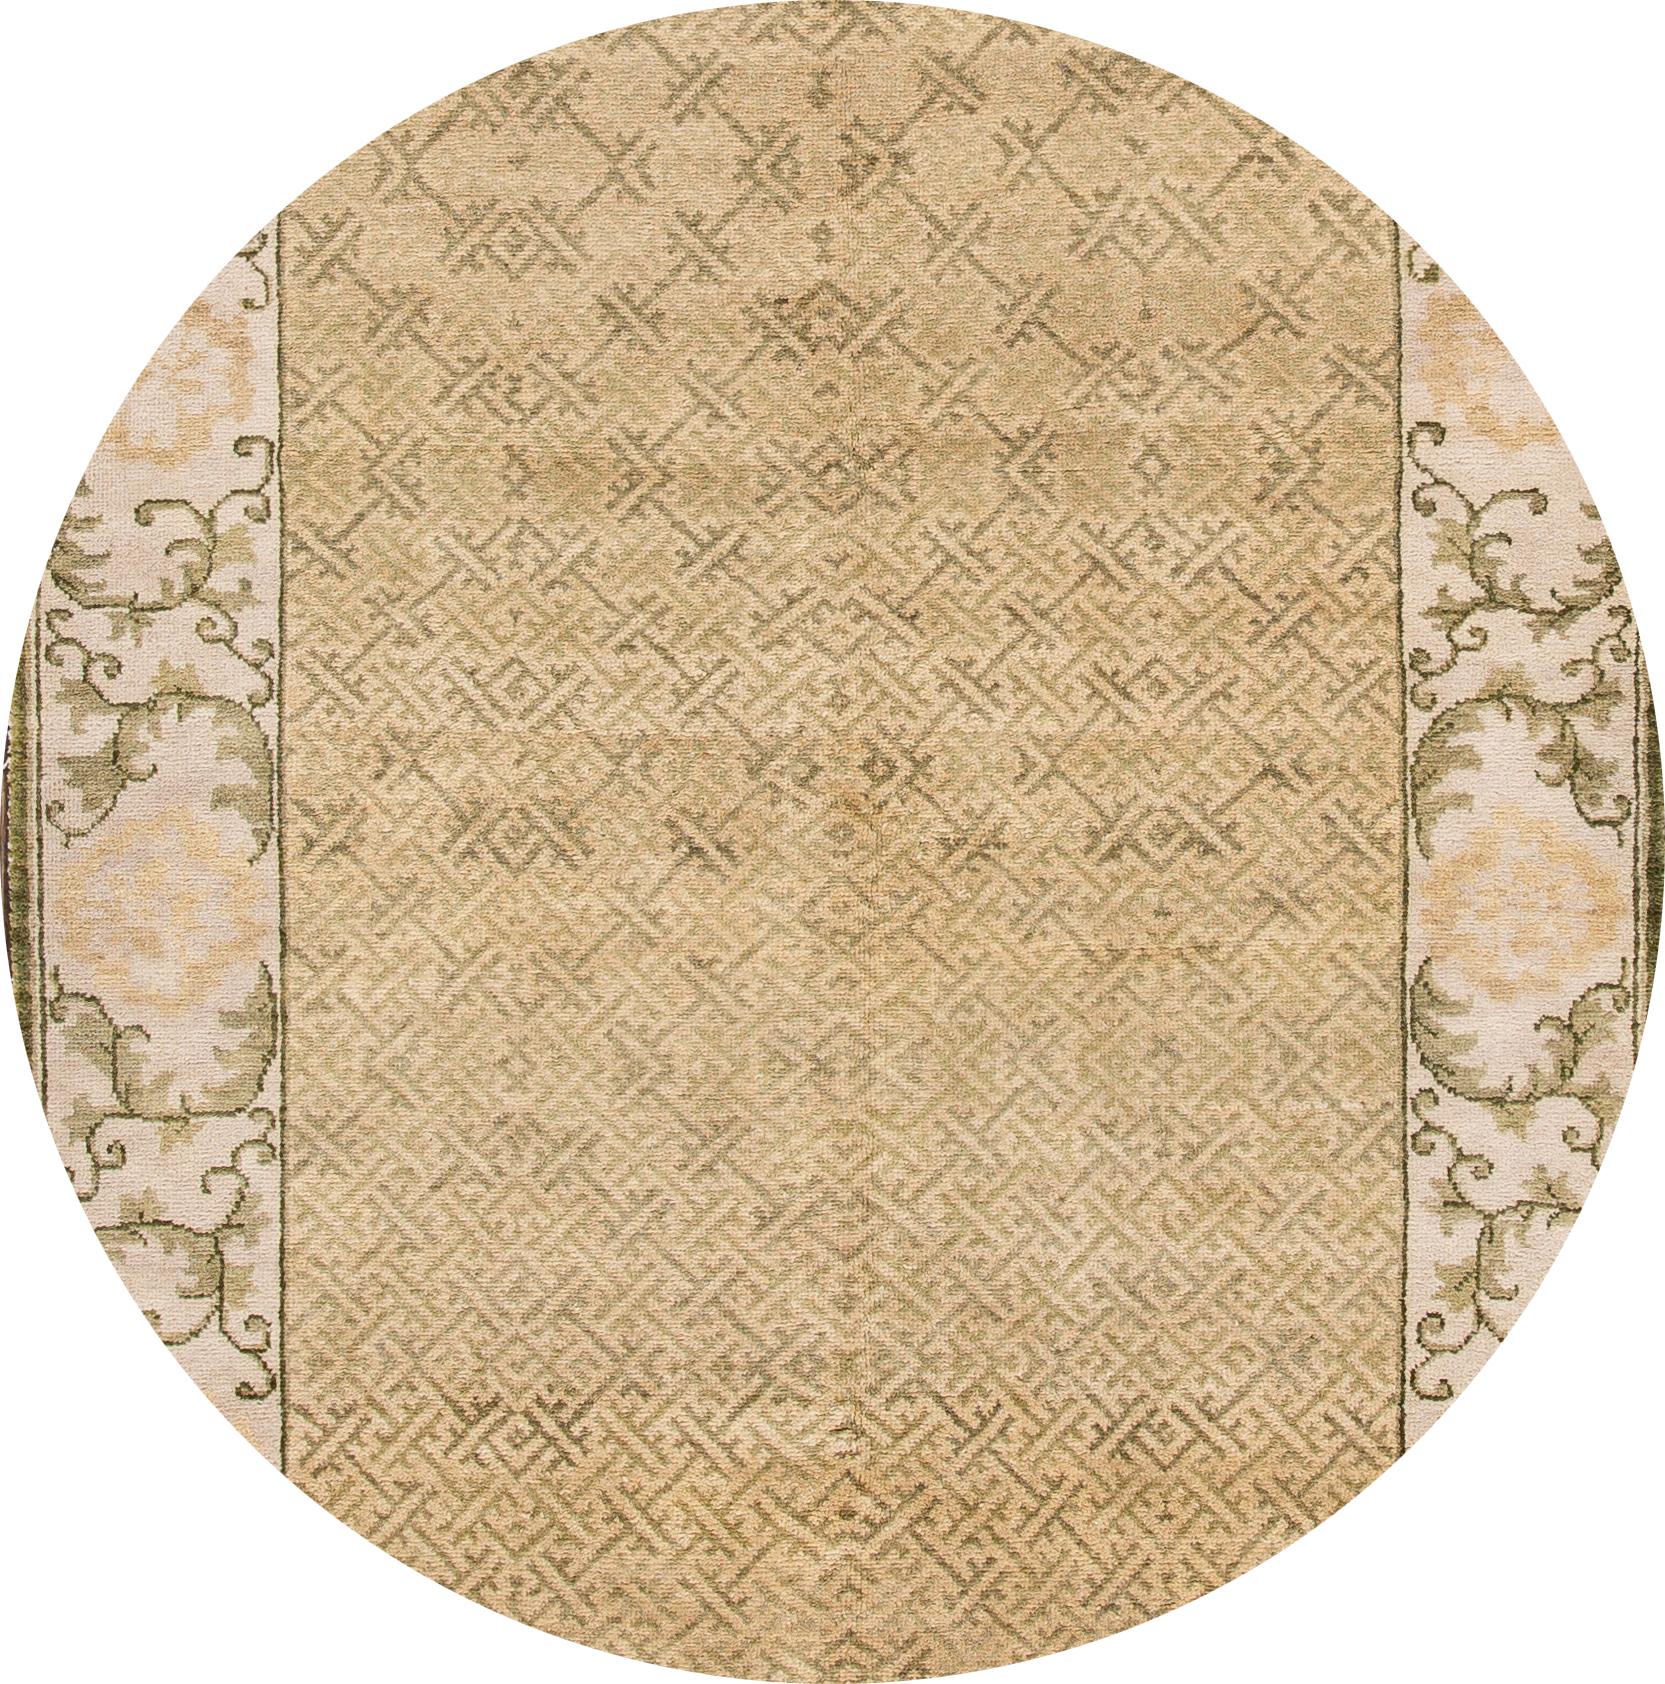 Beautiful contemporary Spanish Sino rug, hand knotted wool with a tan field, beige frame, green and dark brown accents in an all-over geometric design.
This rug measures: 5'8” x 9'.